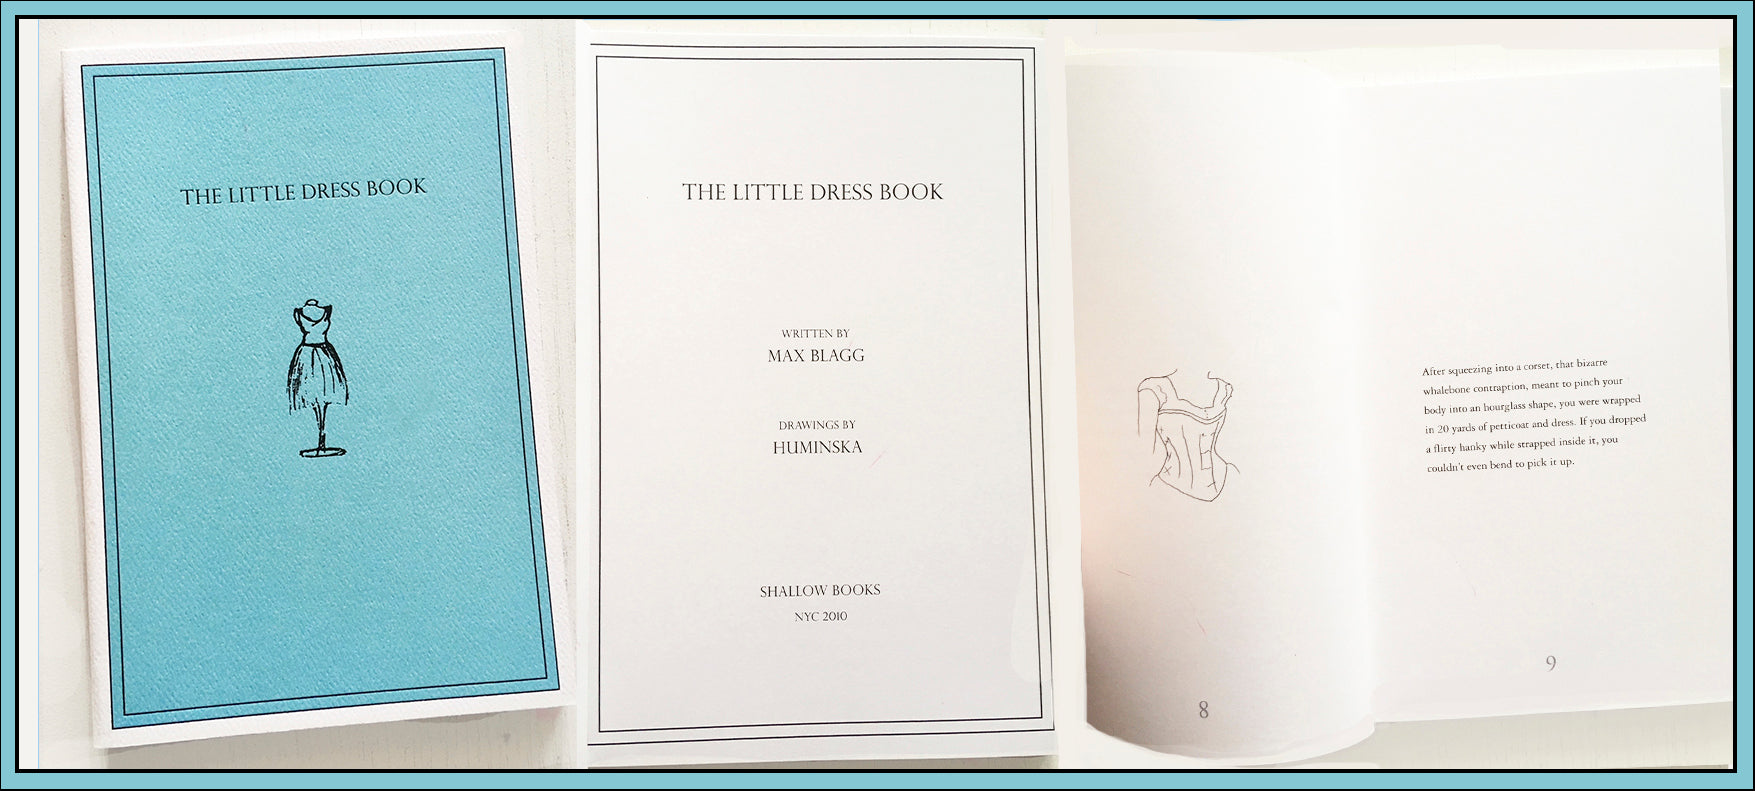 The Little Dress Book written by Max Blagg with drawings by HUMINSKA $20.00